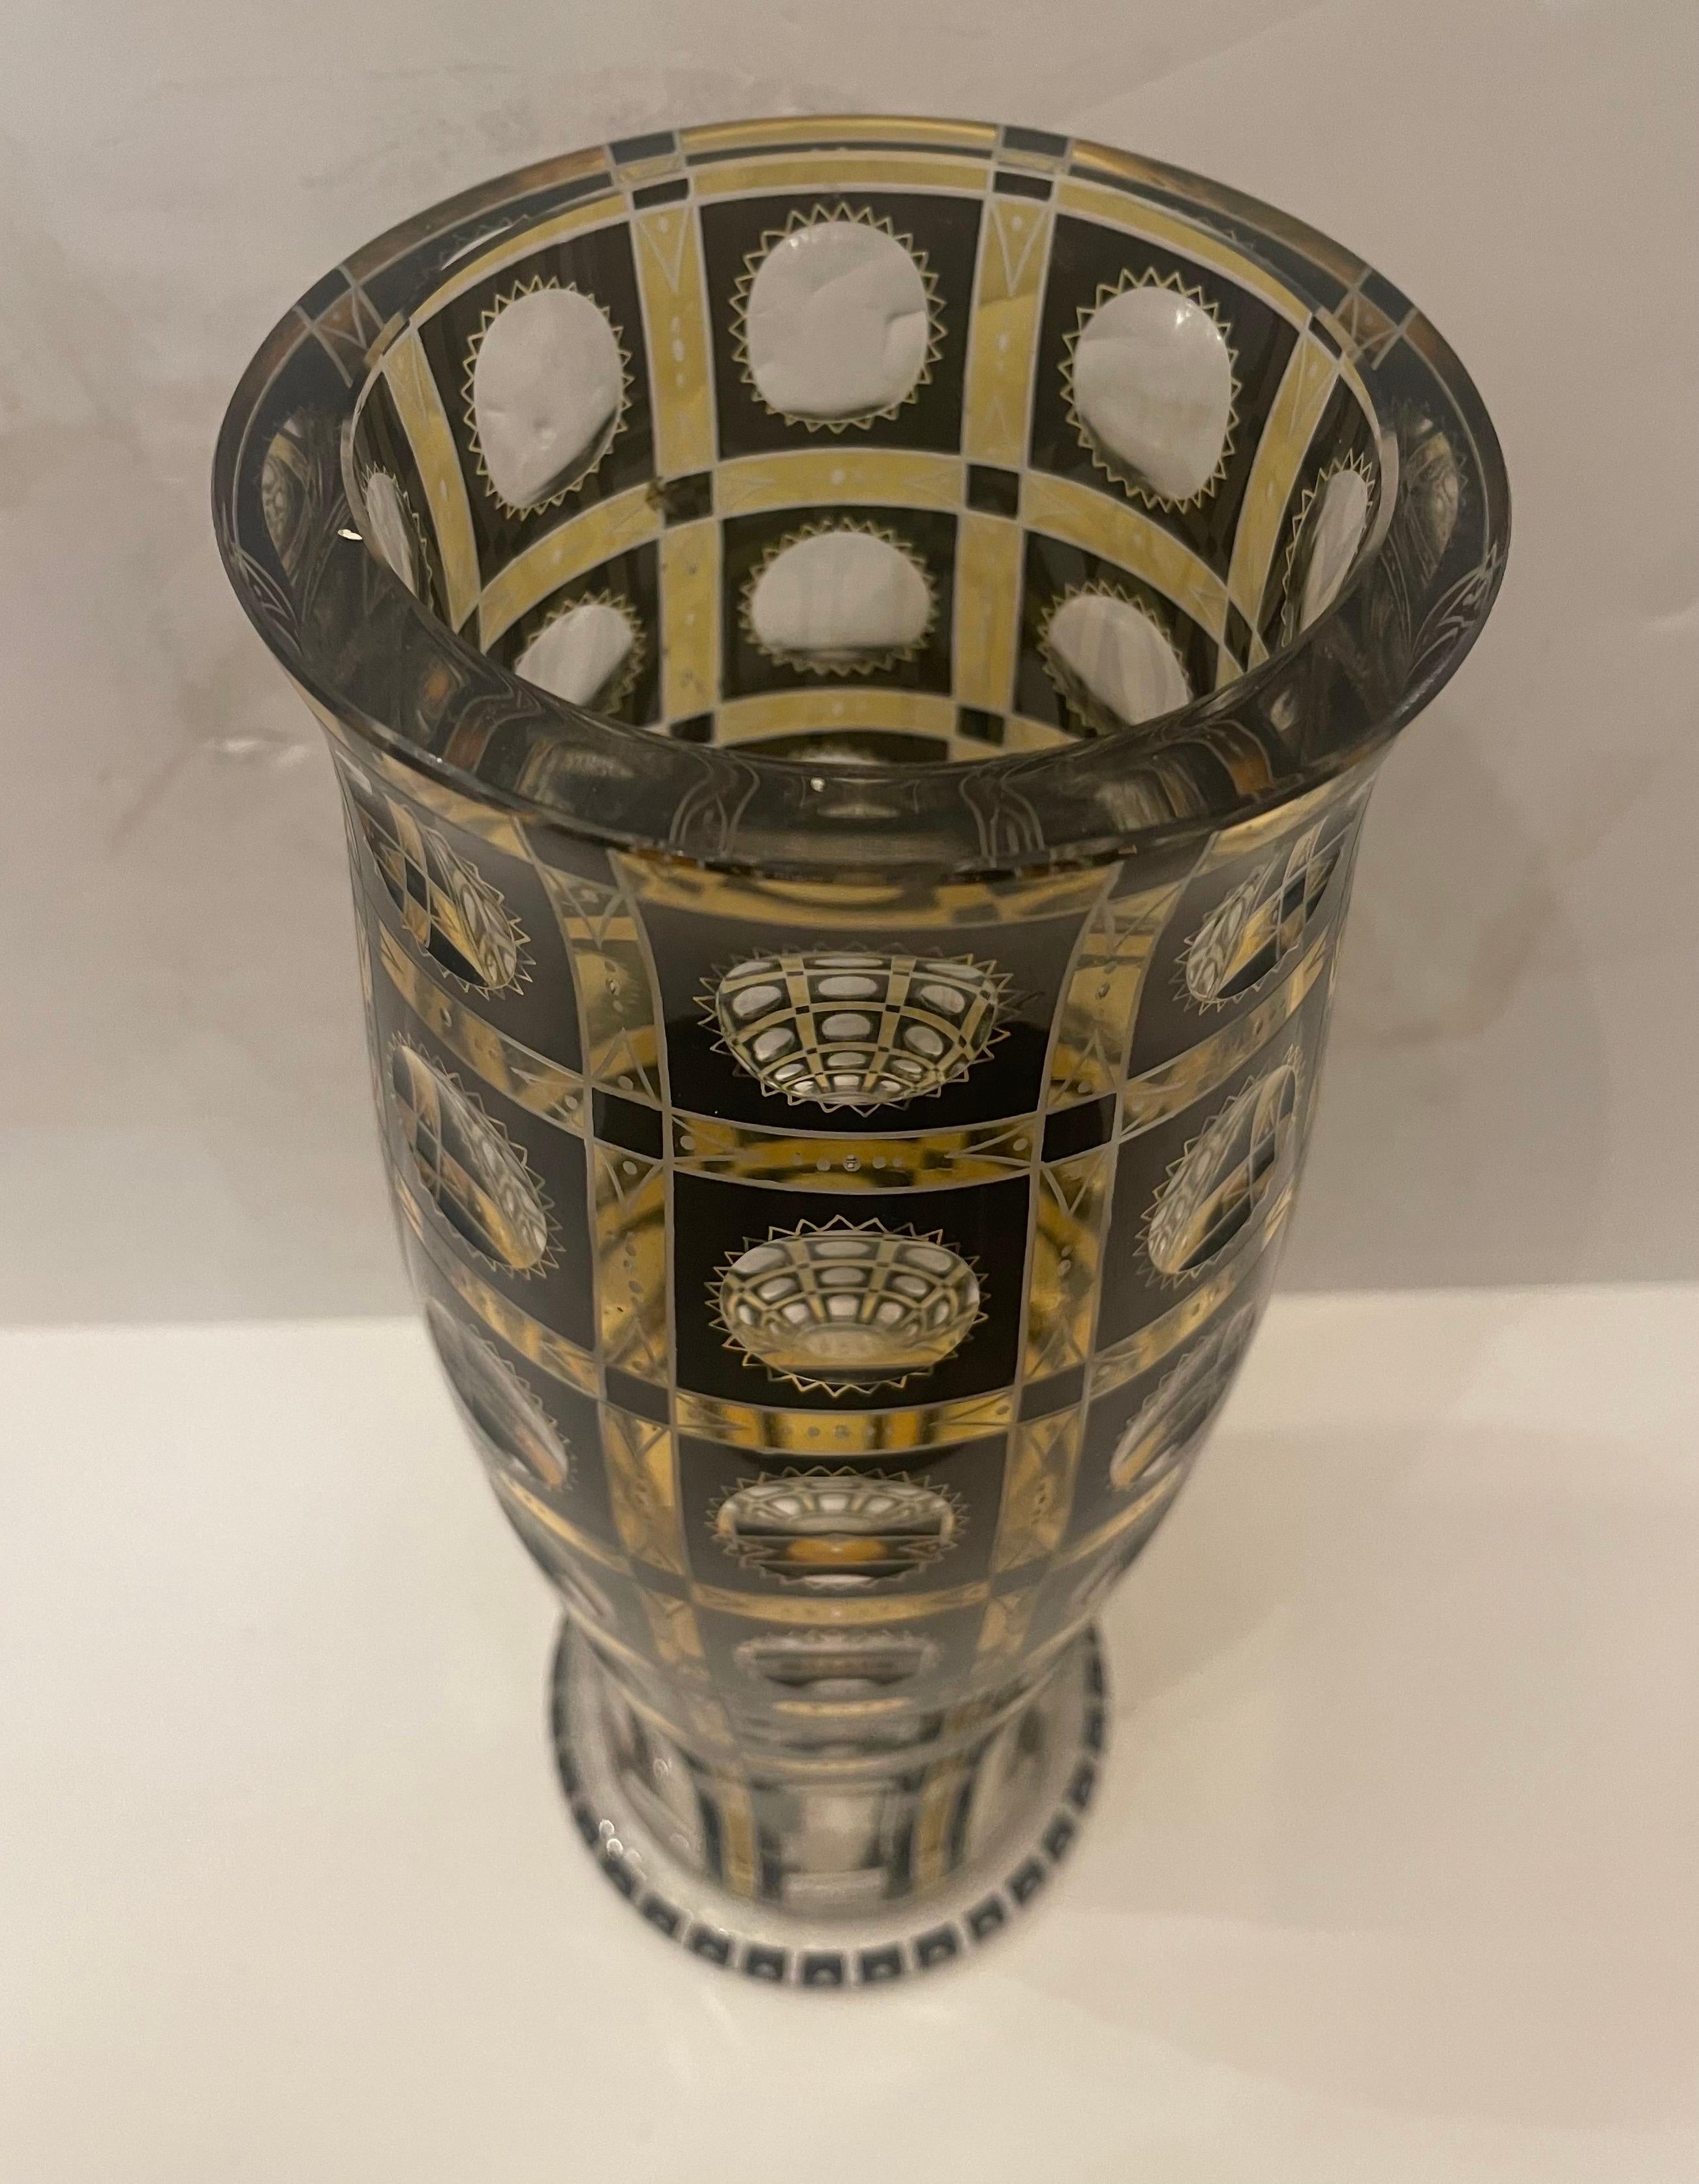 Wonderful Moser Art Glass Art Deco Enameled Yellow Black Etched Crystal Vase In Good Condition For Sale In Roslyn, NY